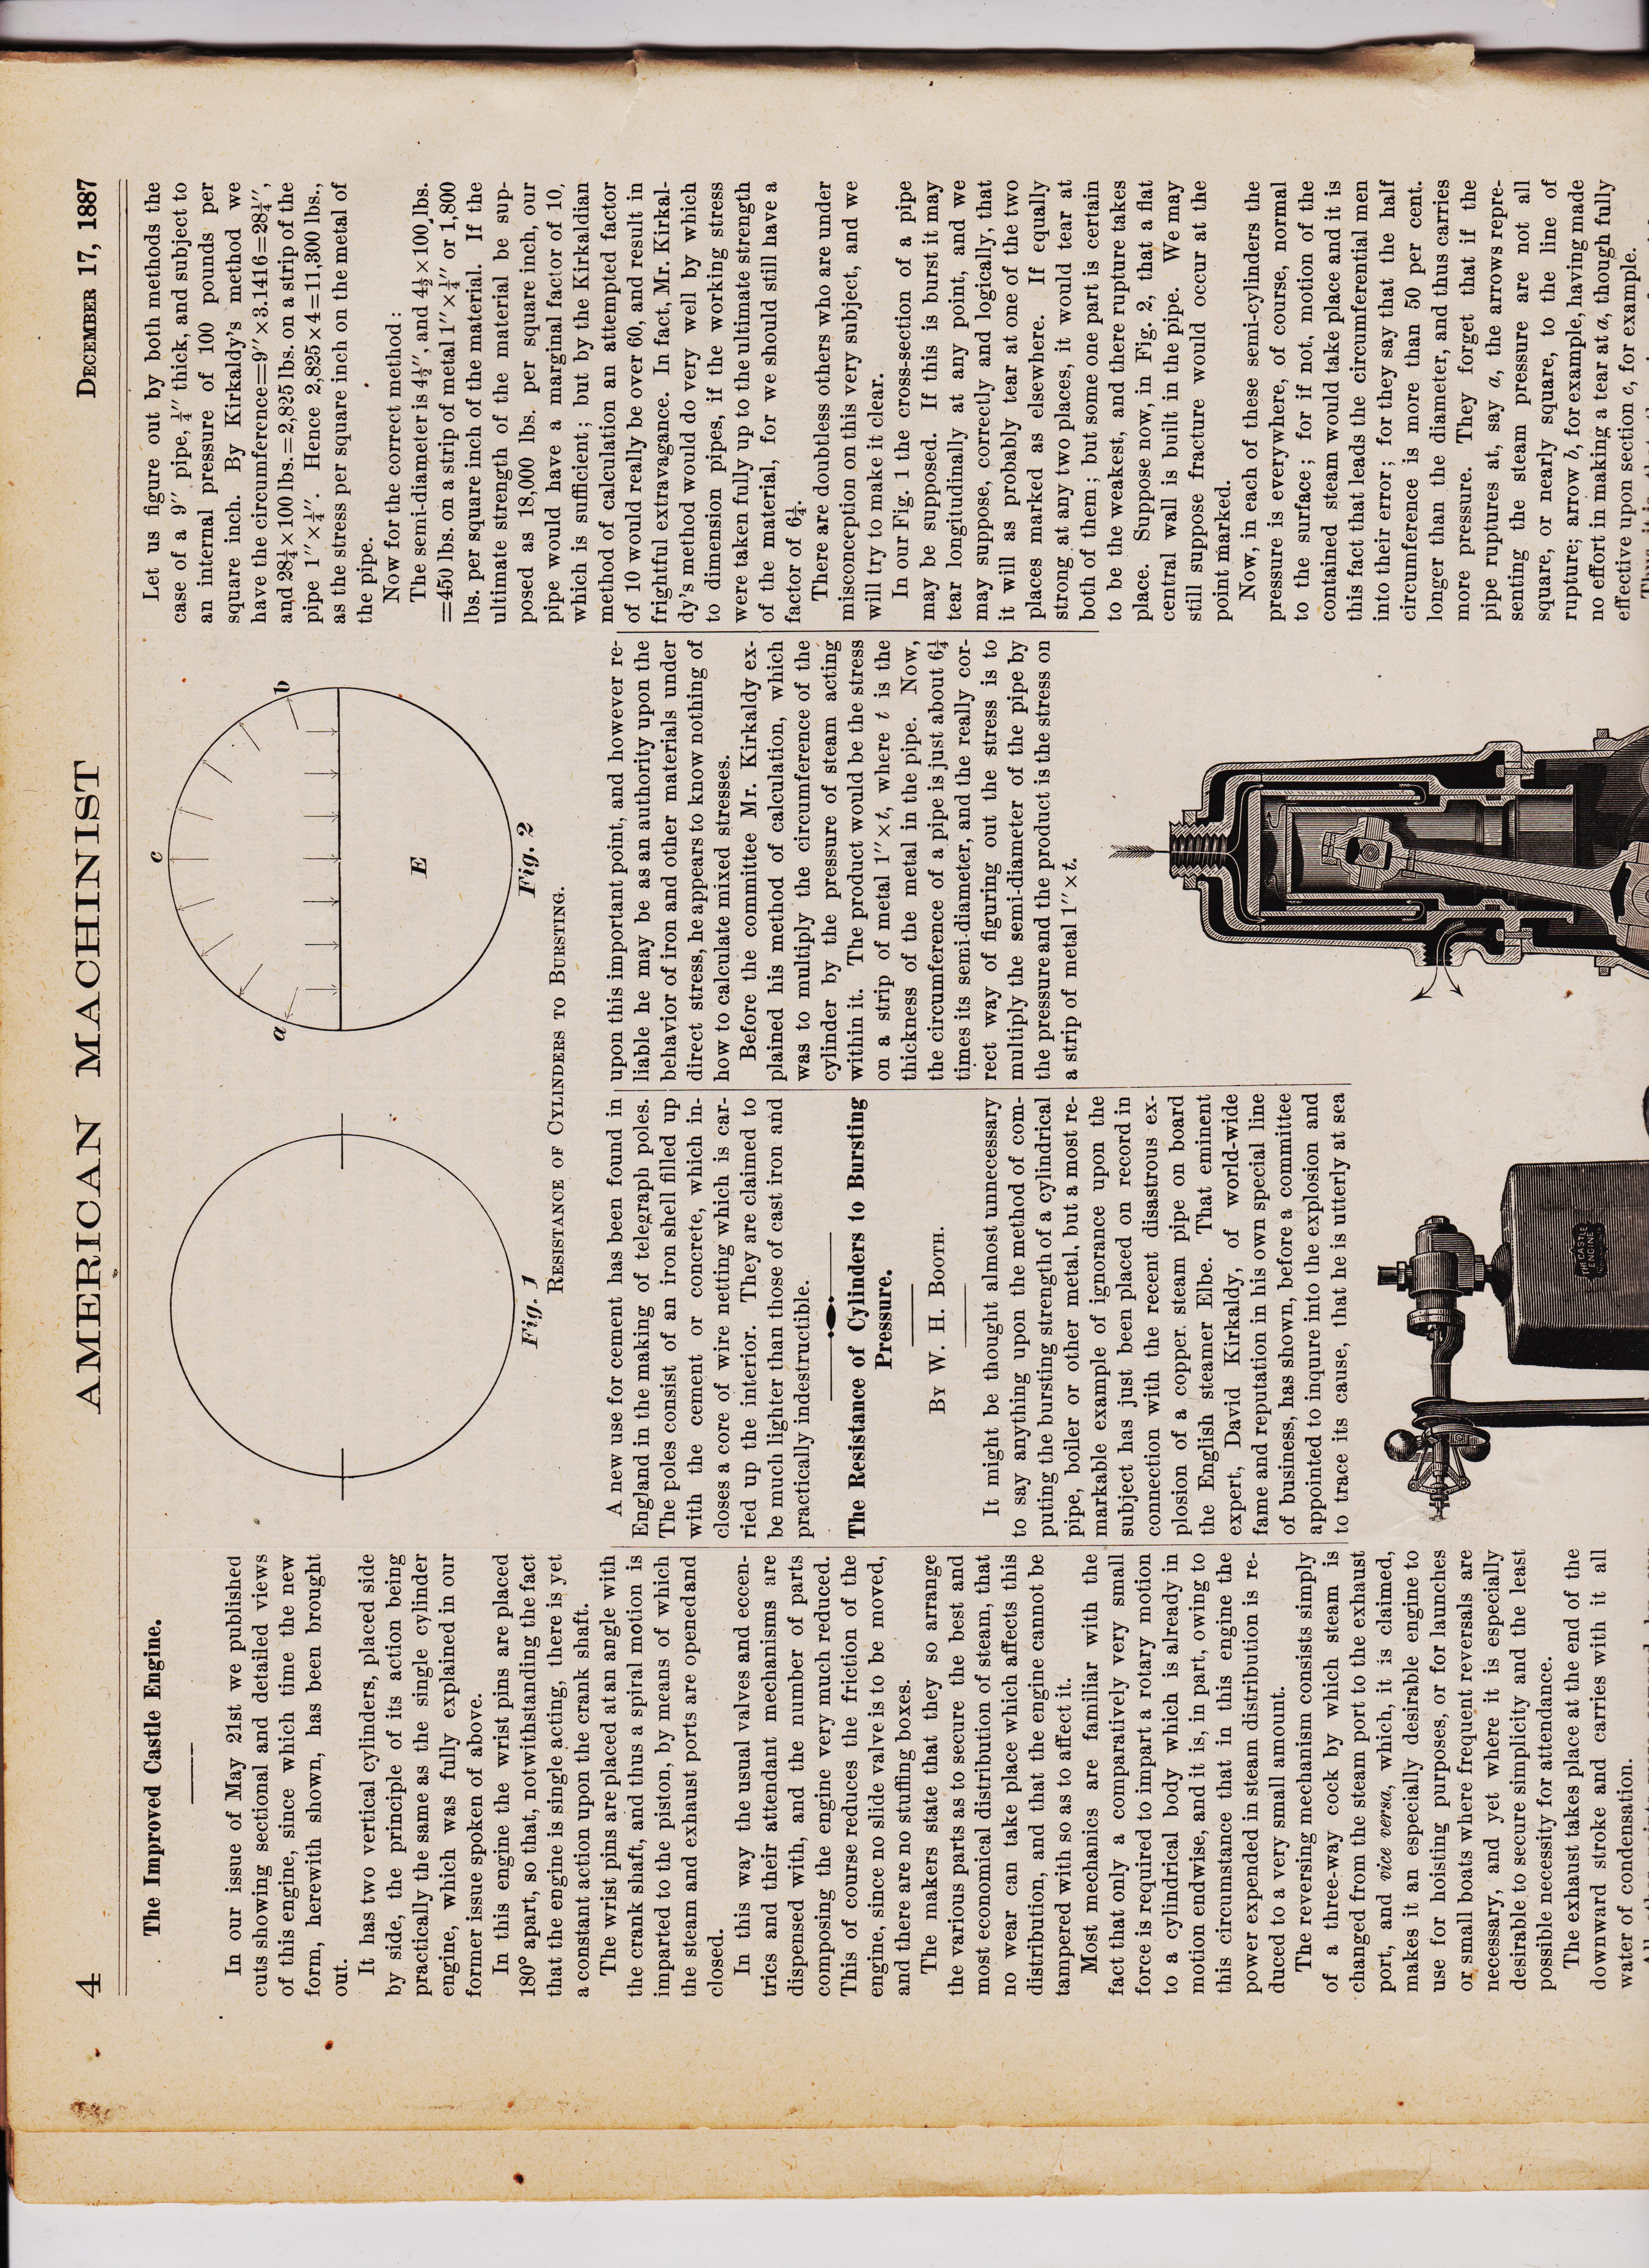 https://antiquemachinery.com/images-American-Machinist-Dec-17-1887/American-Machinist-Dec-17-1887-pg-4-top-Improved-Castle-Engine-Resistance-to-Bursting-Pressure-of-cylidrical-Structures.jpeg